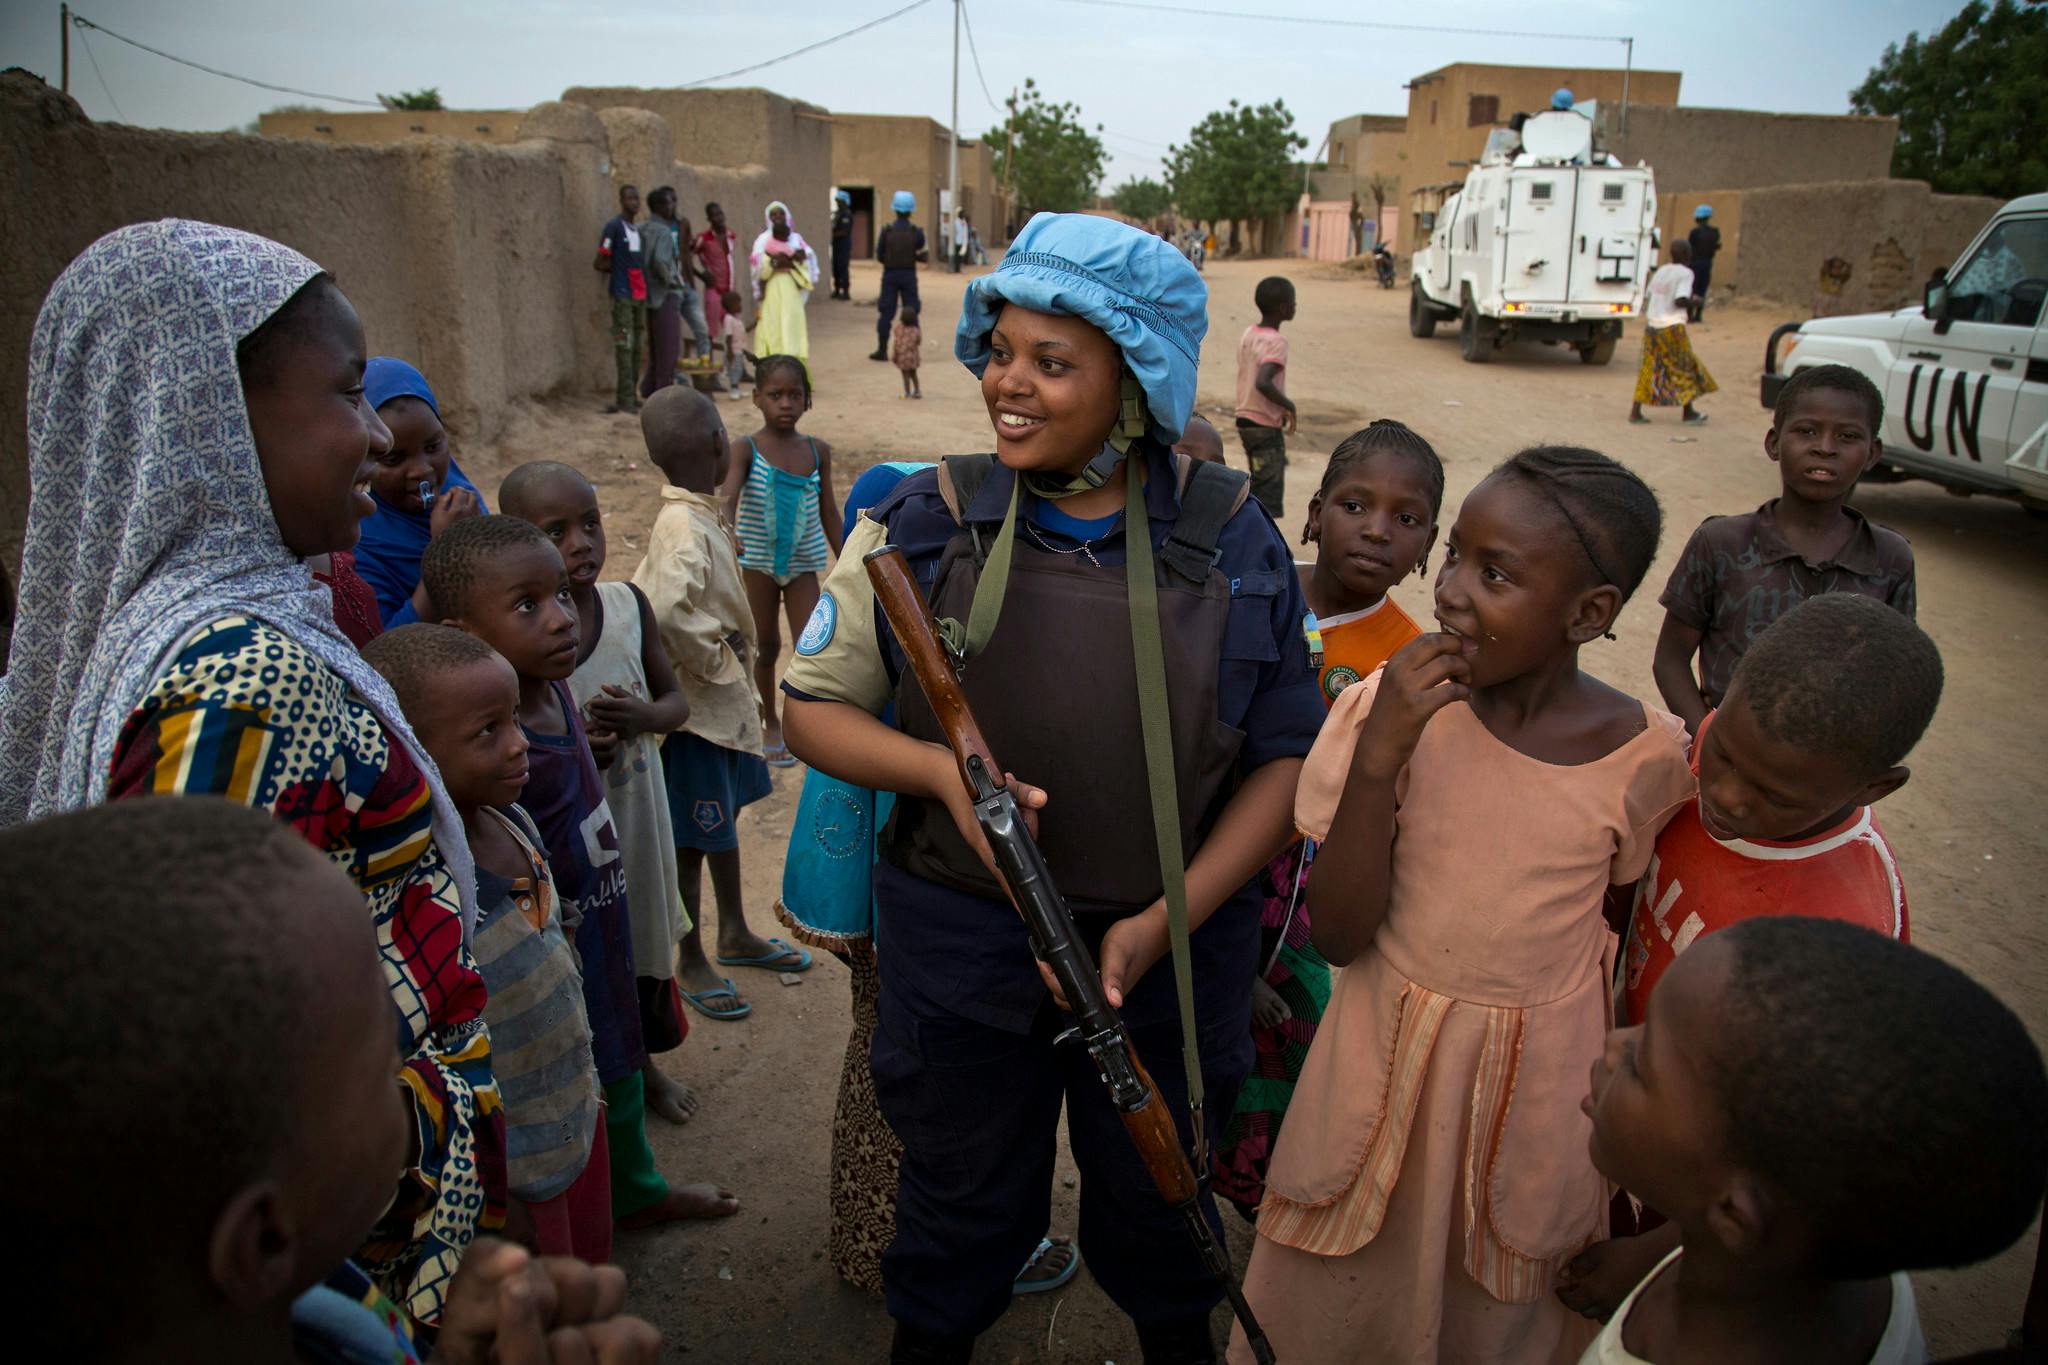 A female soldier with a blue helmet surrounded by women and girls.